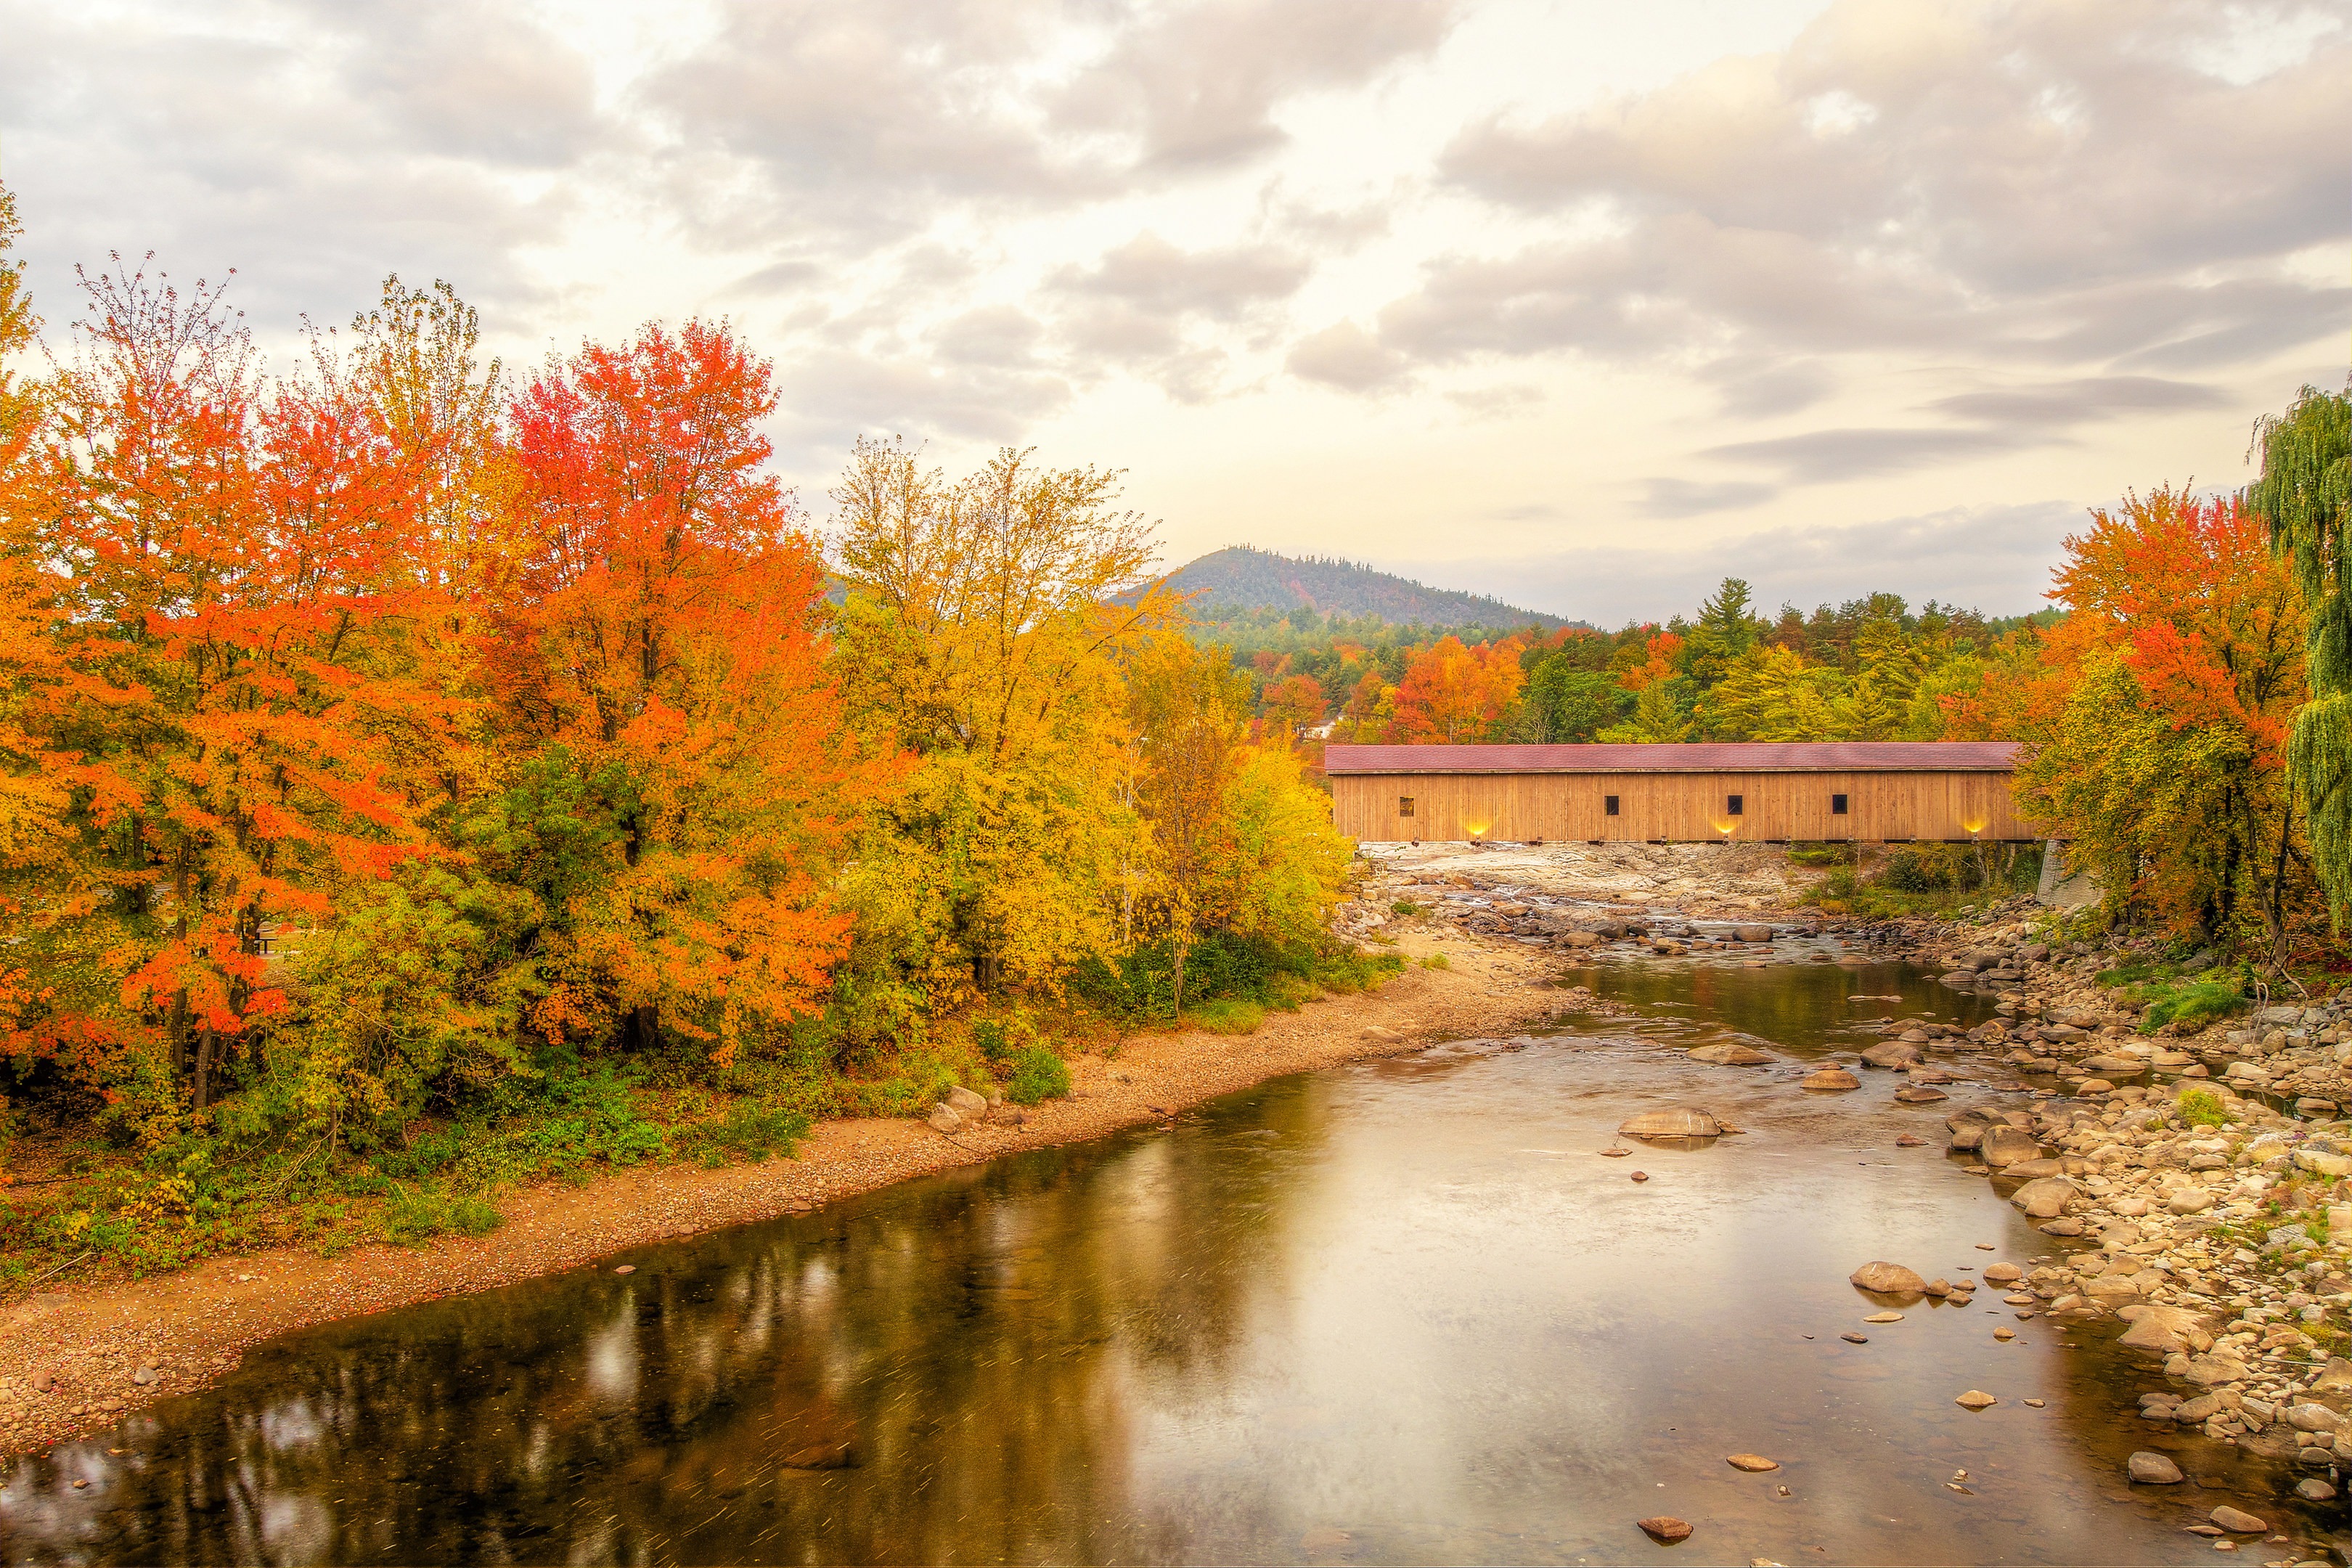 Our favorite fall combo? Cool hikes and colorful leaves